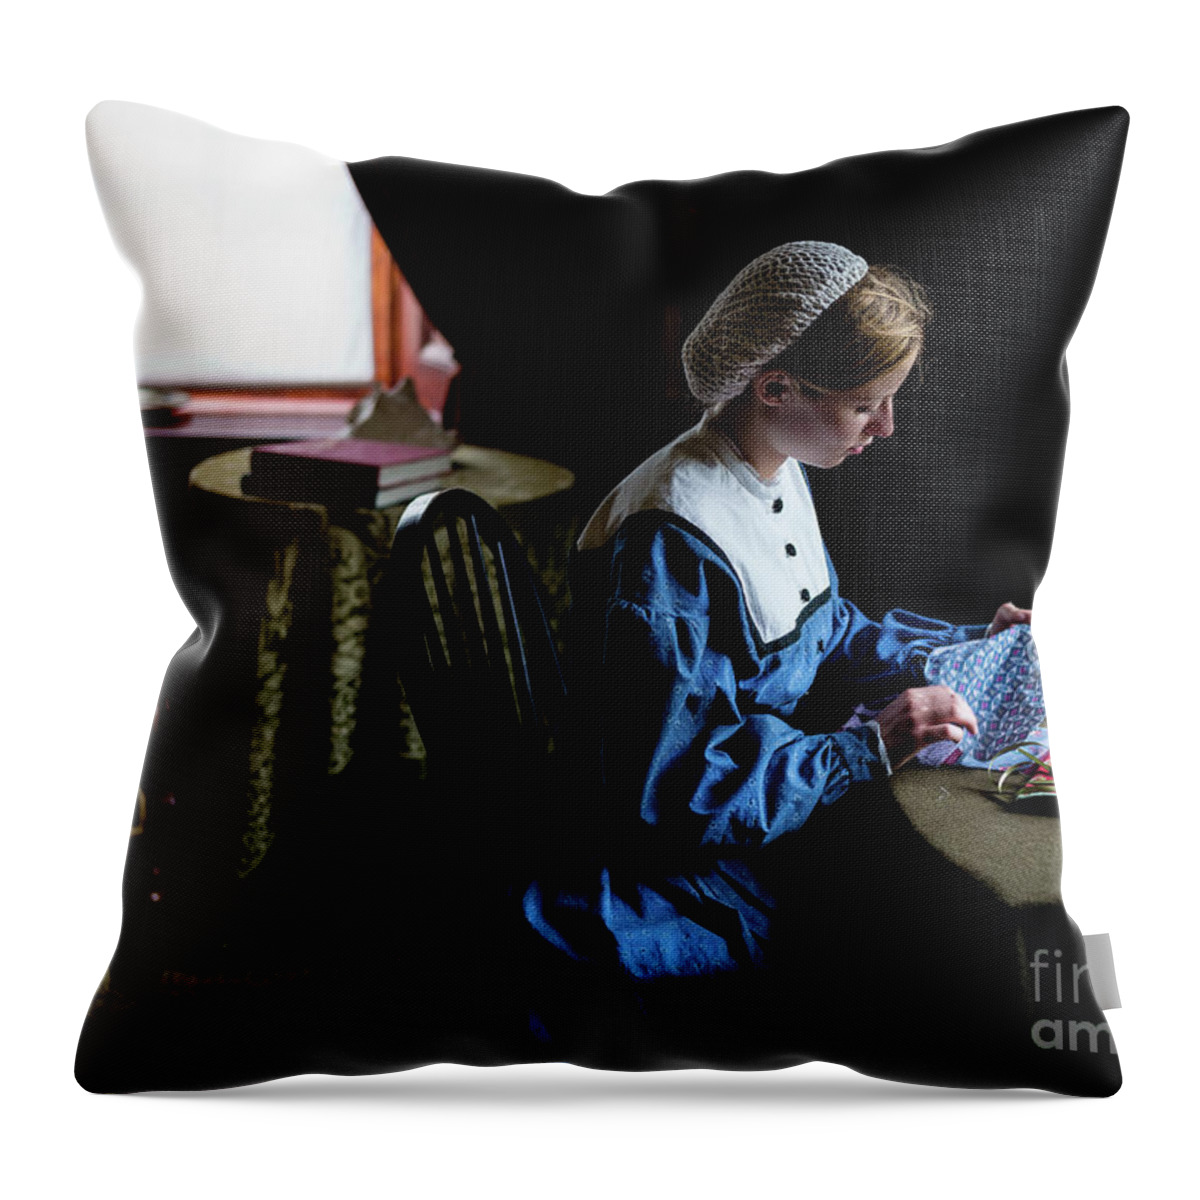 Girl Sewing Throw Pillow featuring the photograph Girl Sewing by M G Whittingham